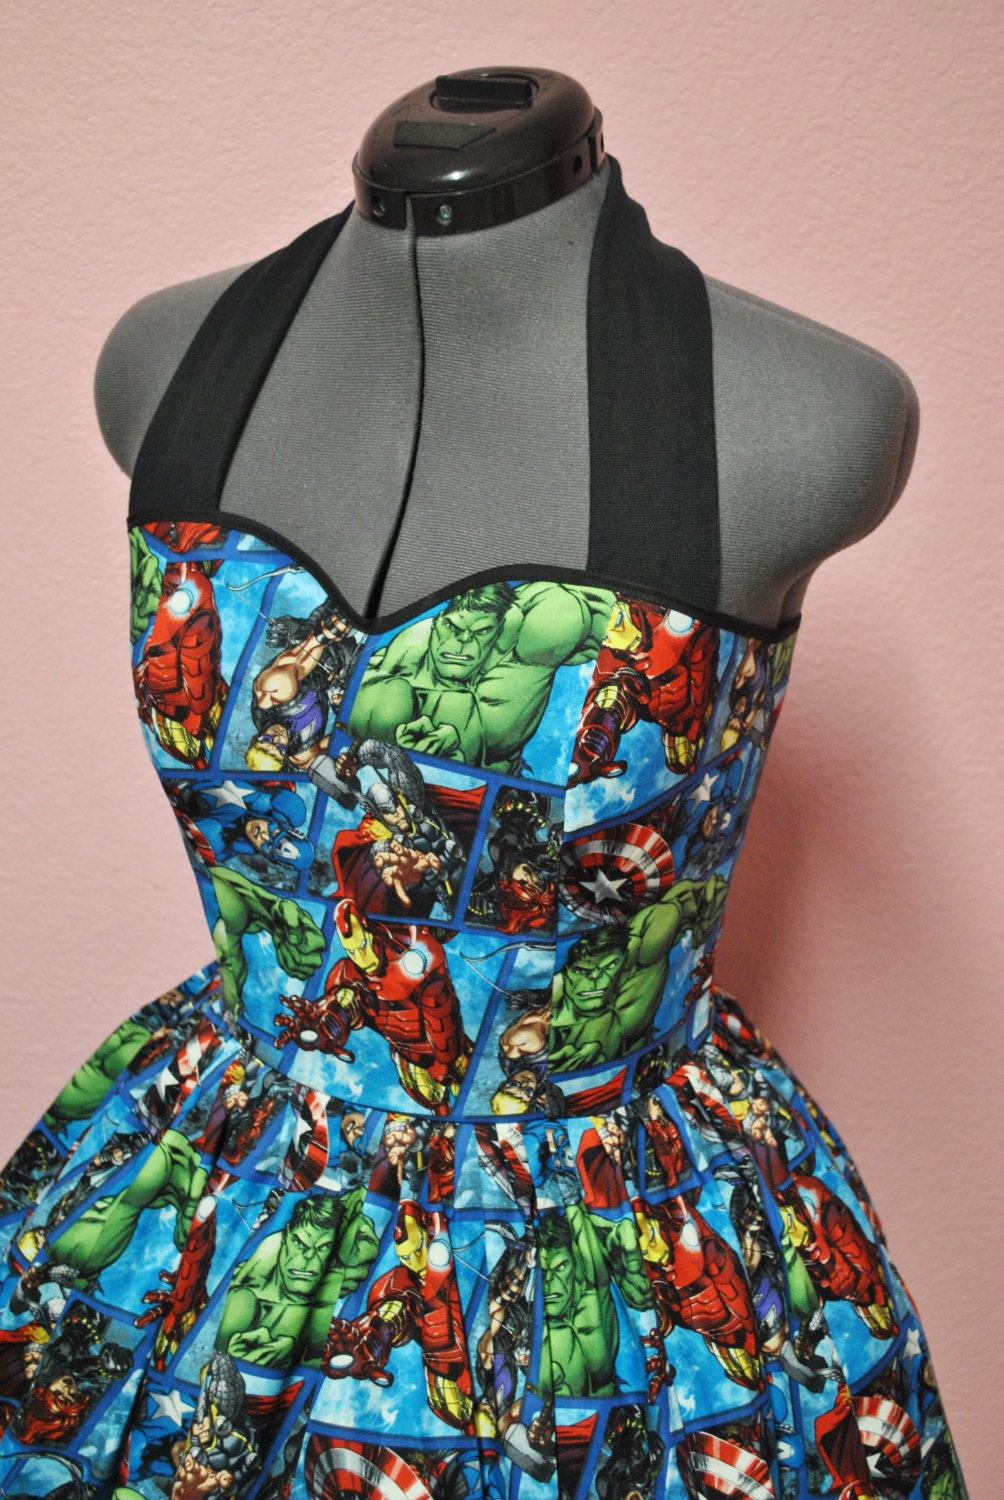 Marvel Avengers Grid Comic Dress by CakeShopCouture on Etsy